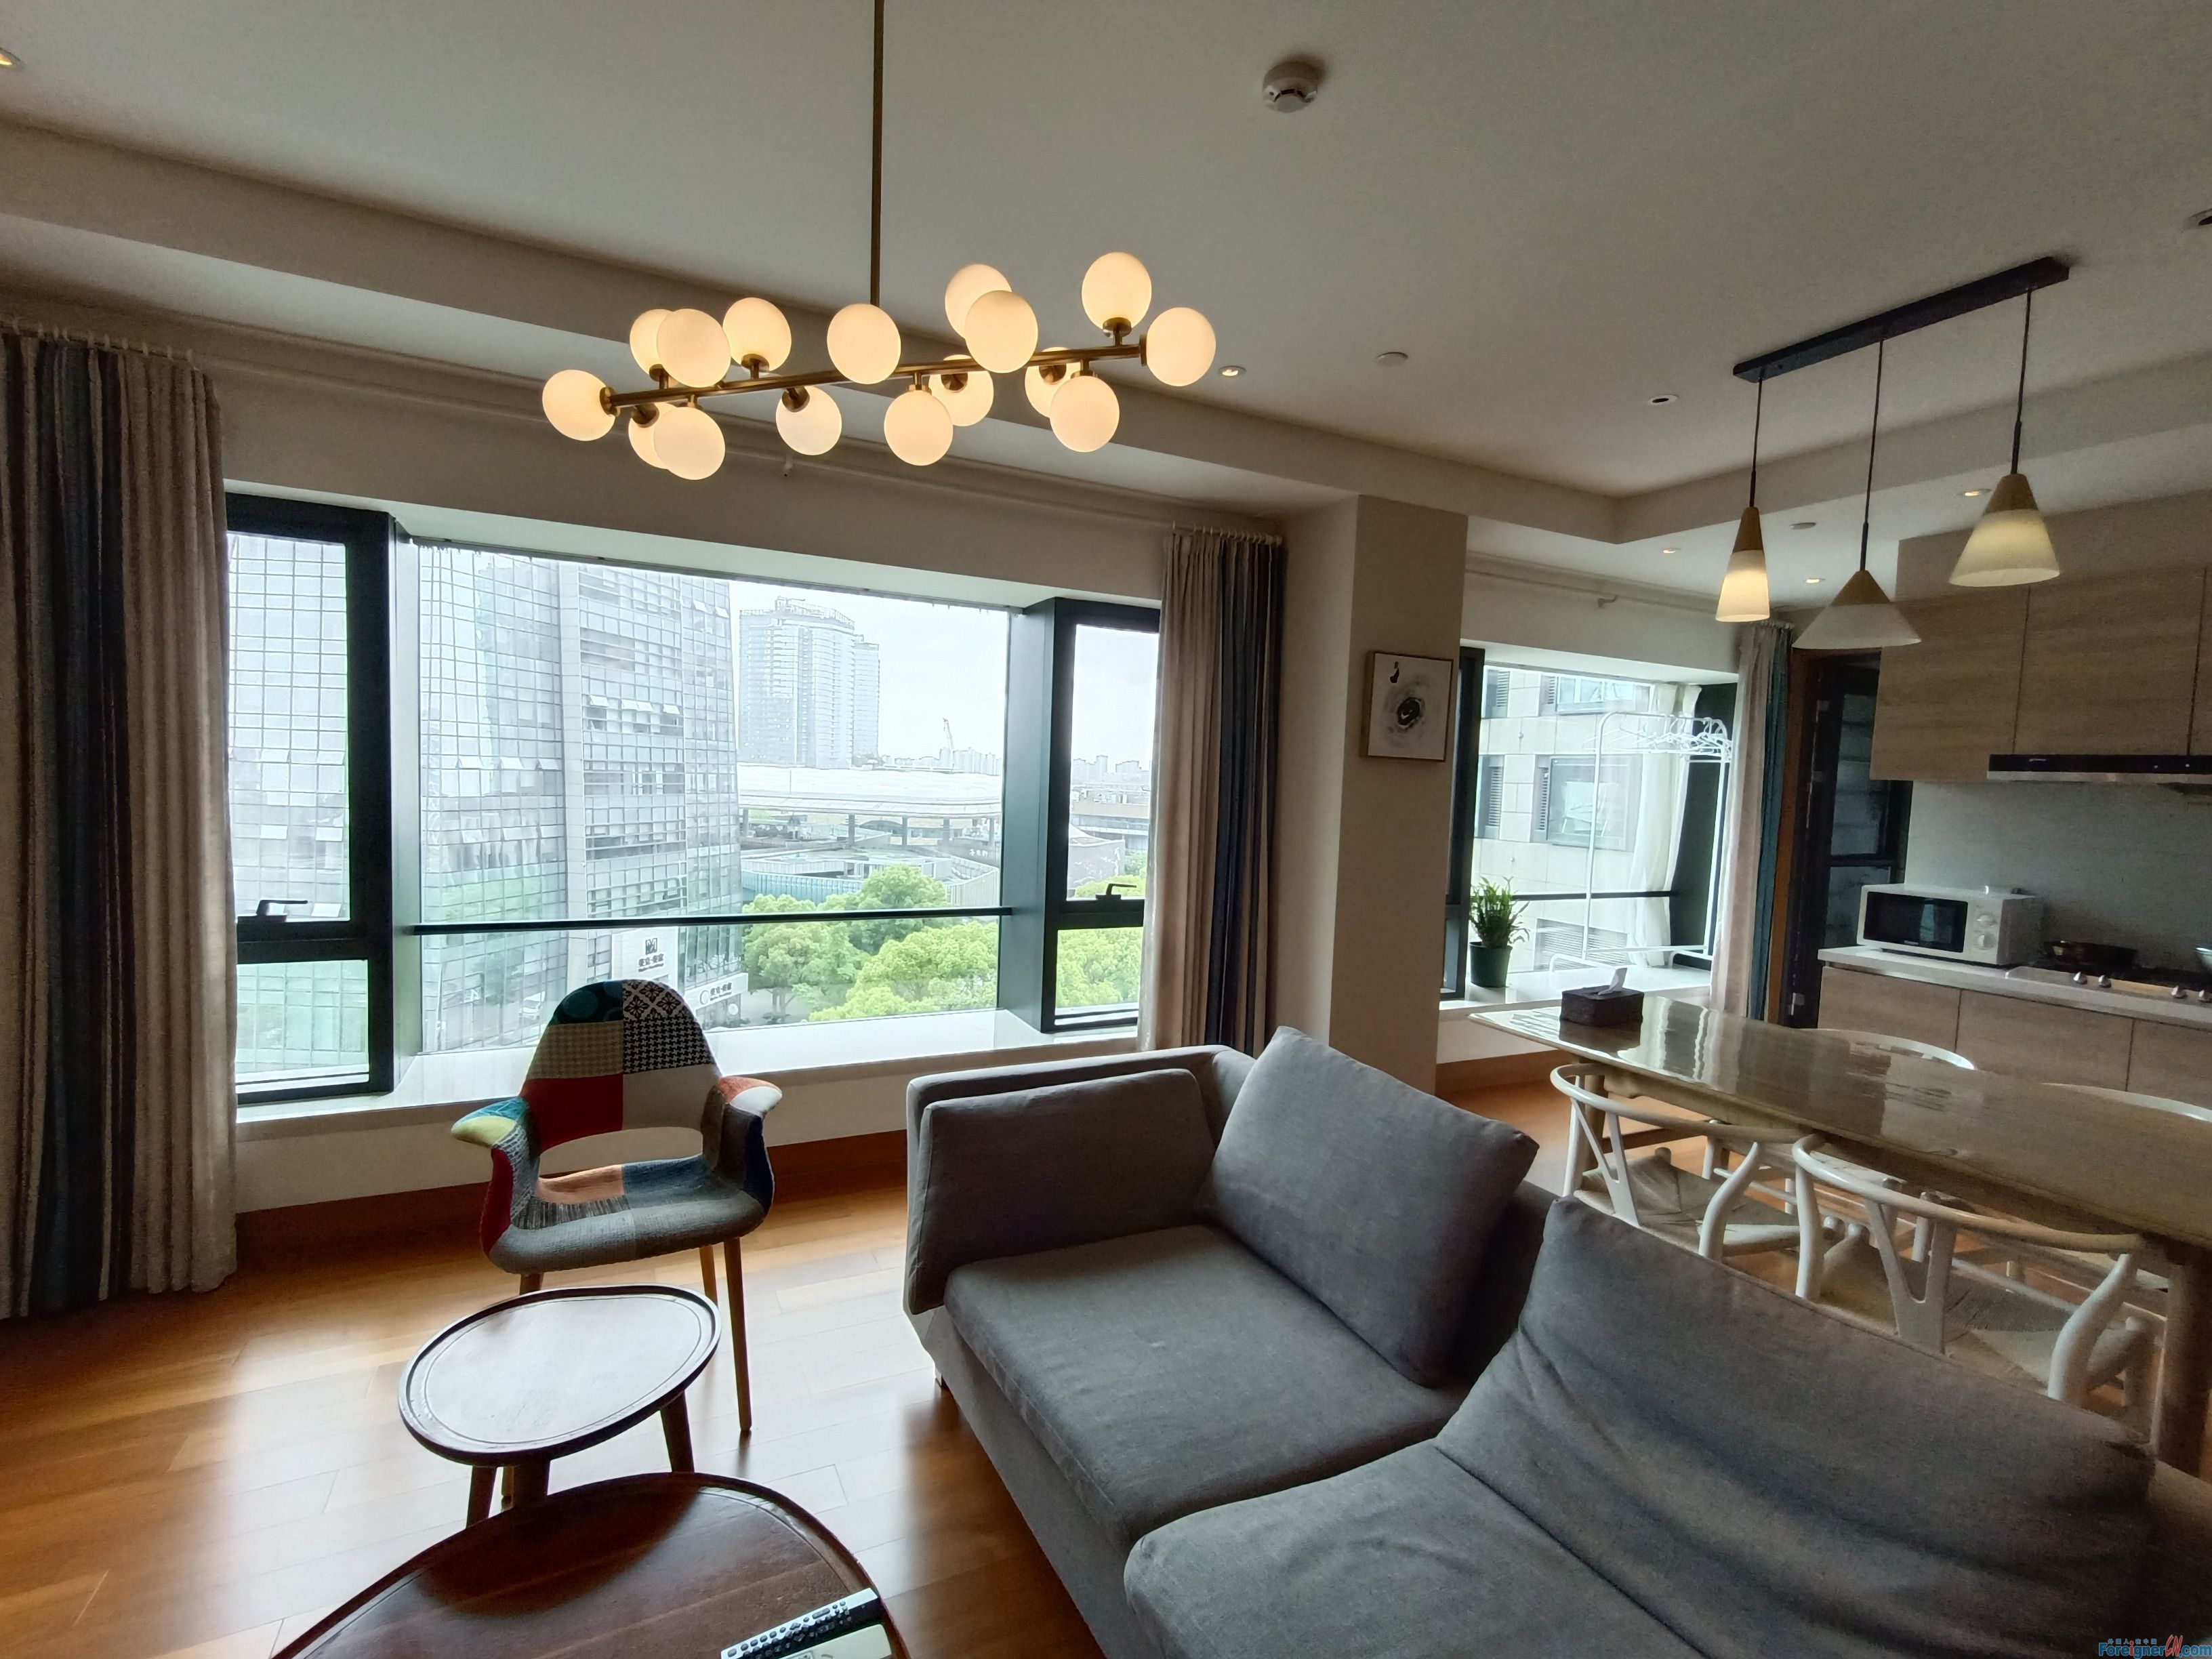  Fabulous!!! Eslite Residence apartment rental in Suzhou/1 bedroom 1 bath /Floor heating and central AC/Time Square,Subway line 1/Jinji Lake/SIP